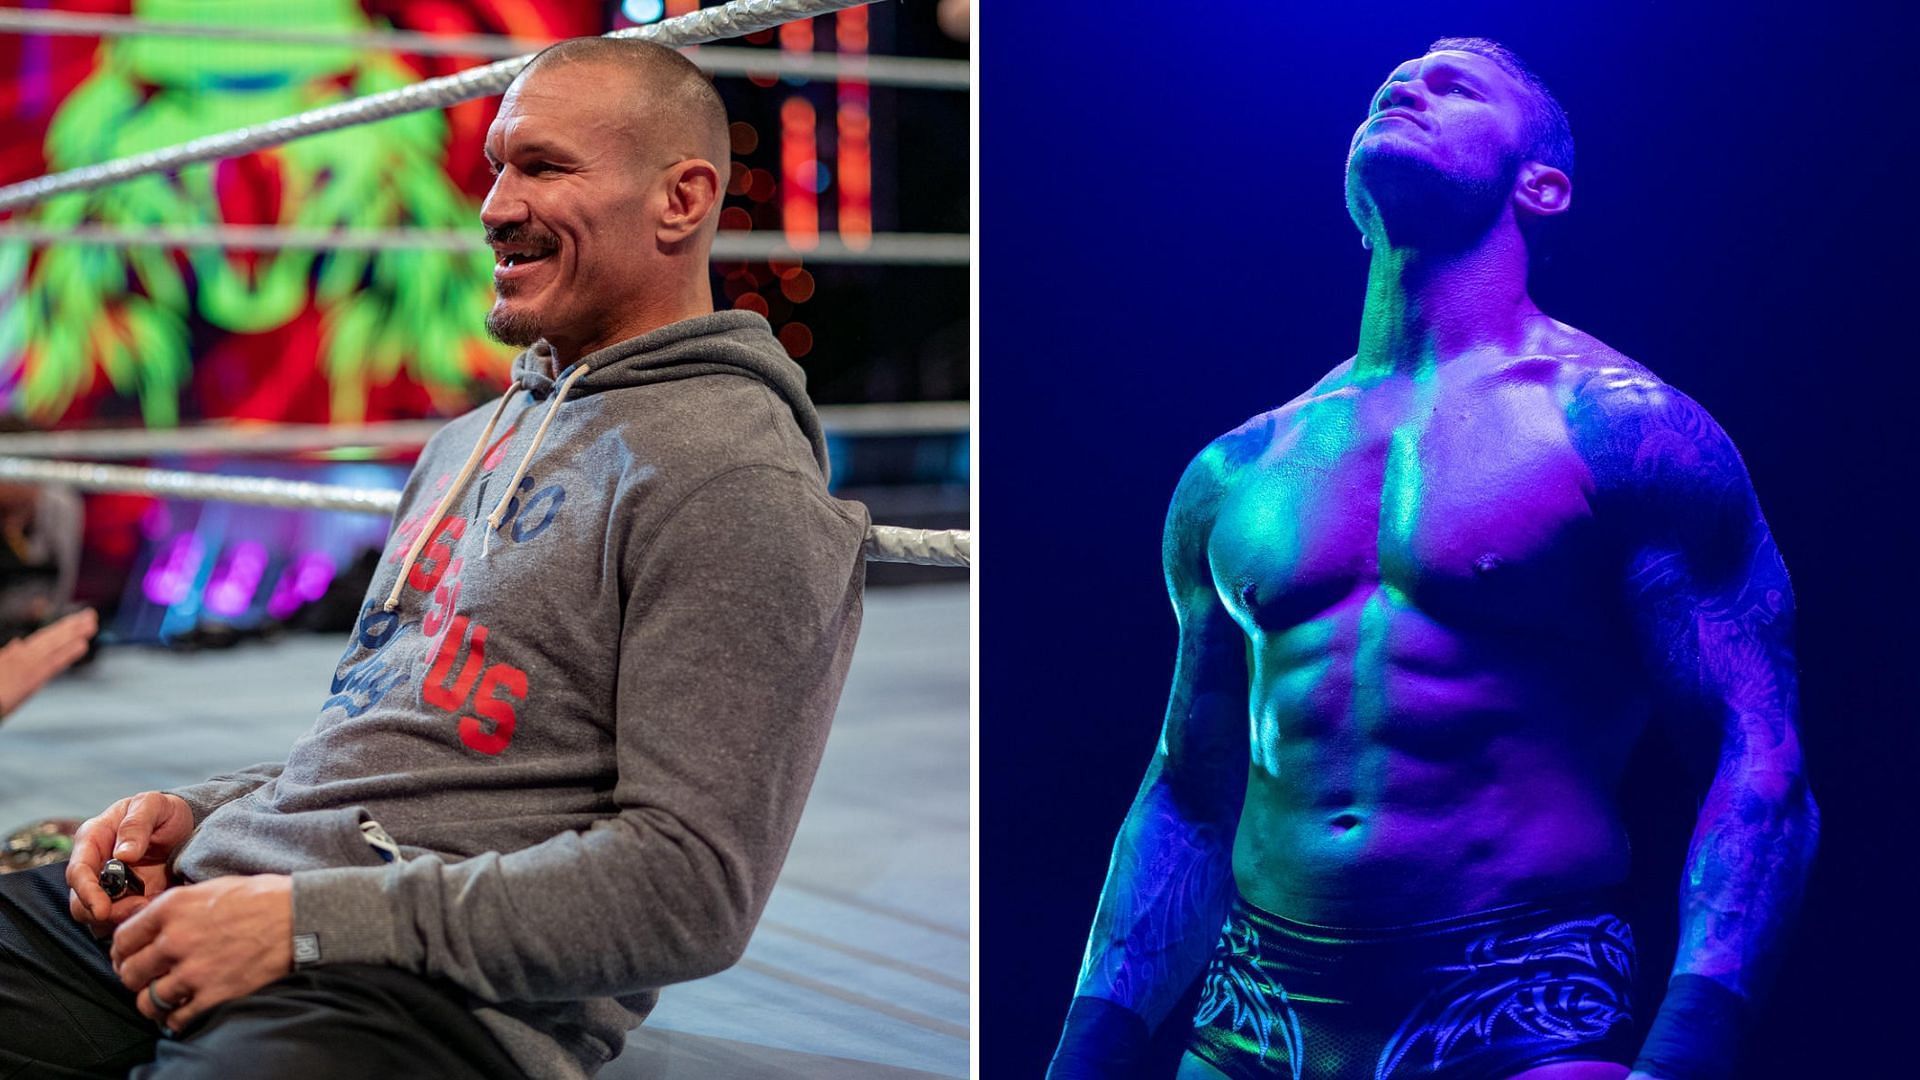 Years from Randy Orton